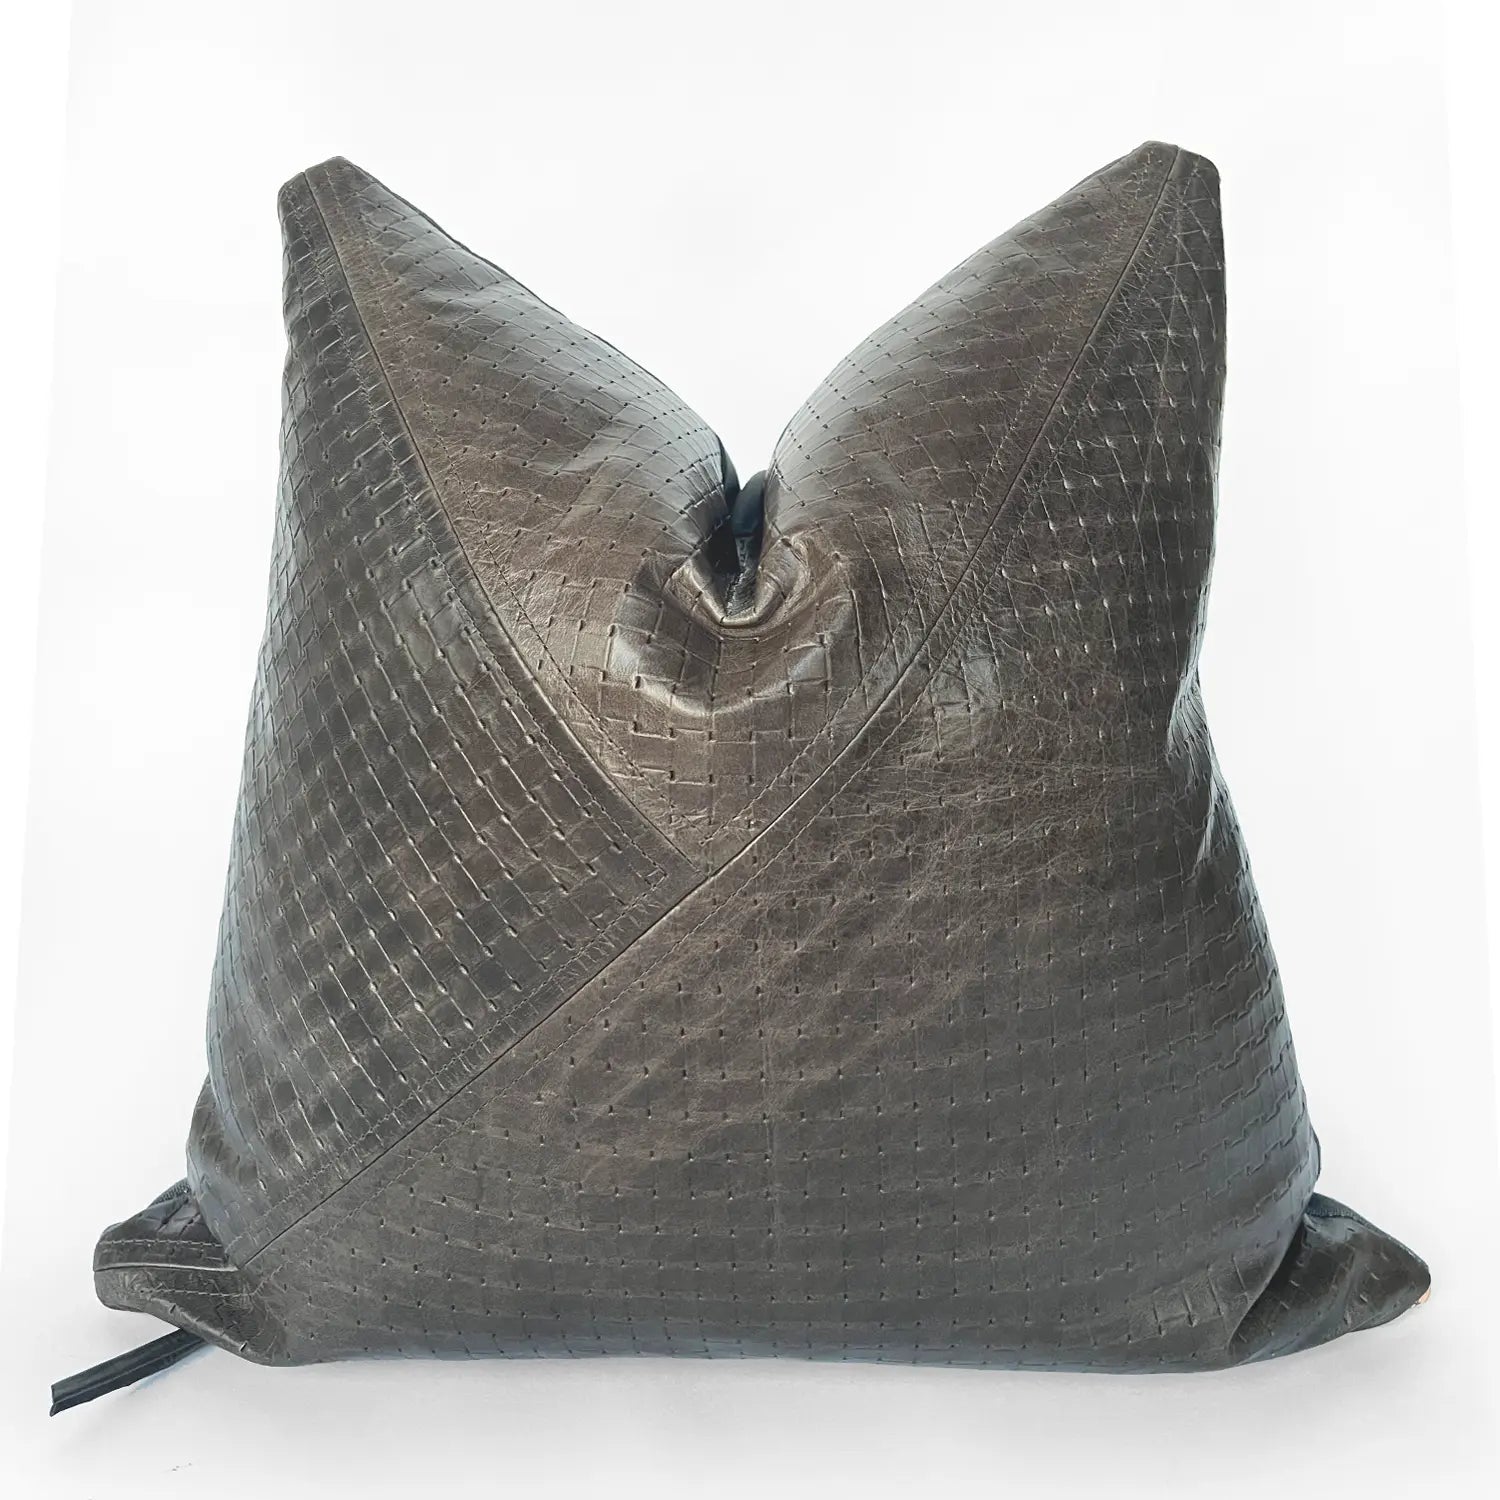 Charcoal Textured Leather Accent Pillow - H U N T E D F O X